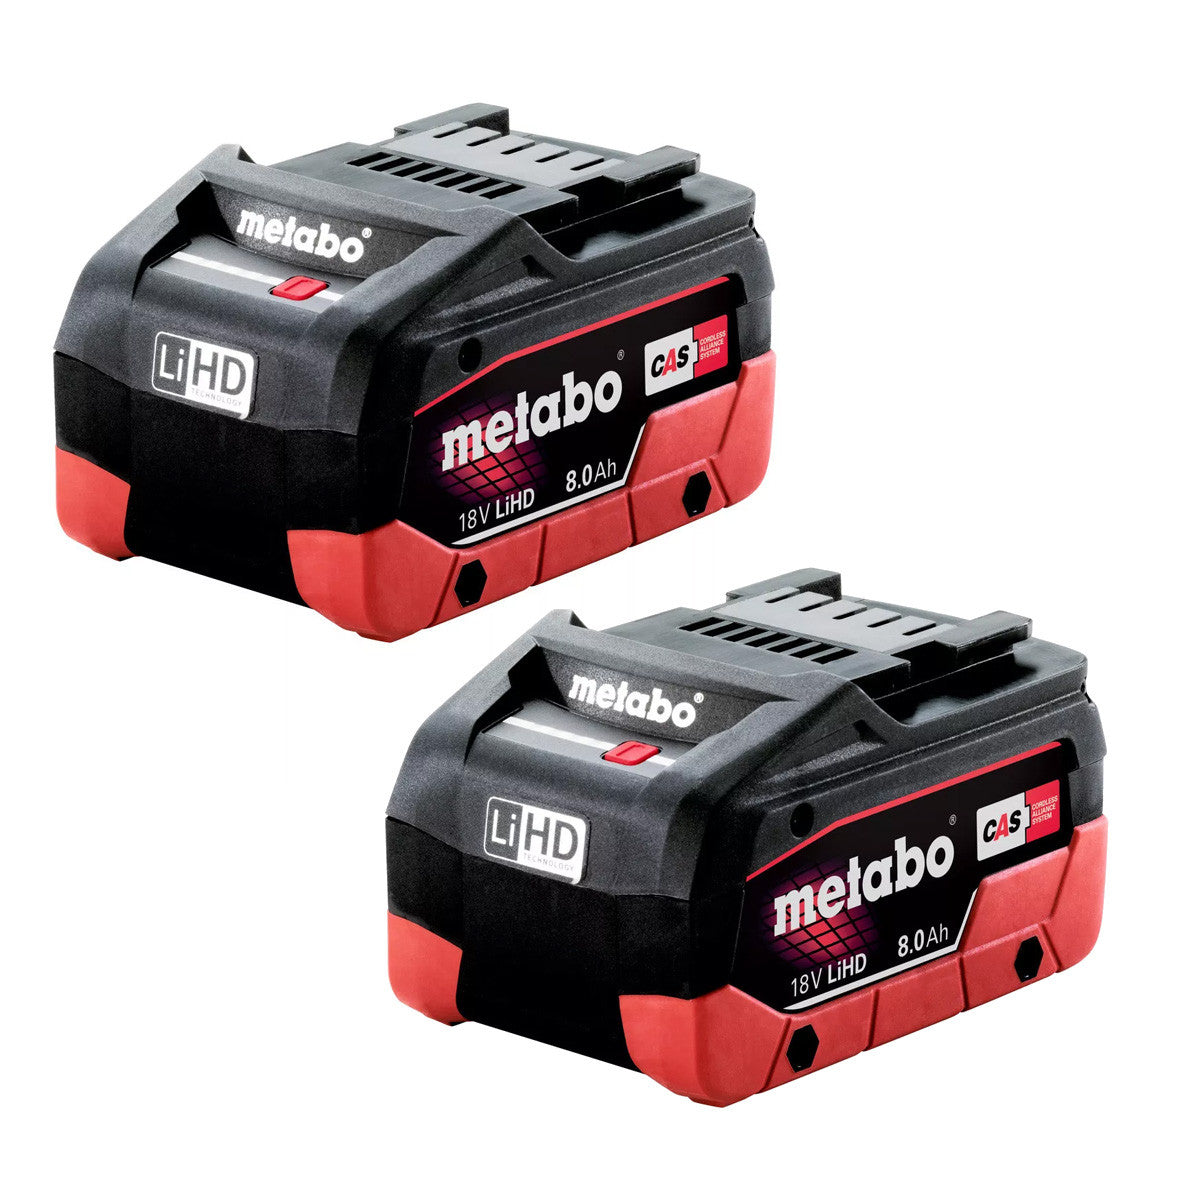 18V 8.0Ah Twin Pack Battery (AU32102800) by Metabo